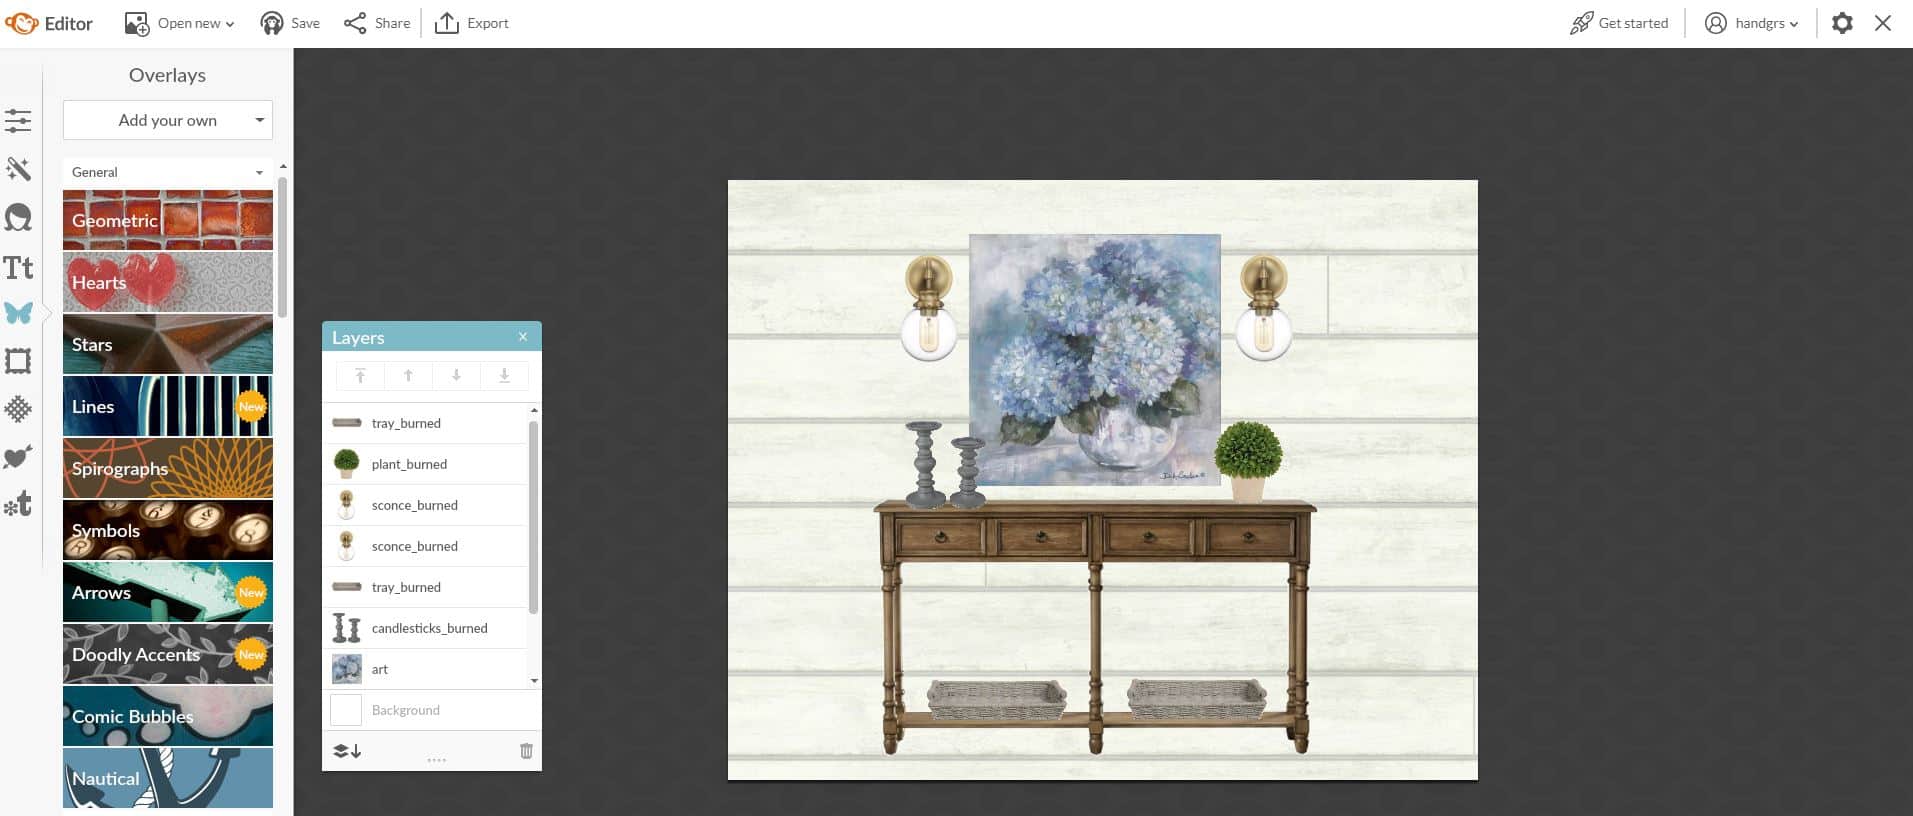 Adding more items such as a floral picture and wall sconces.